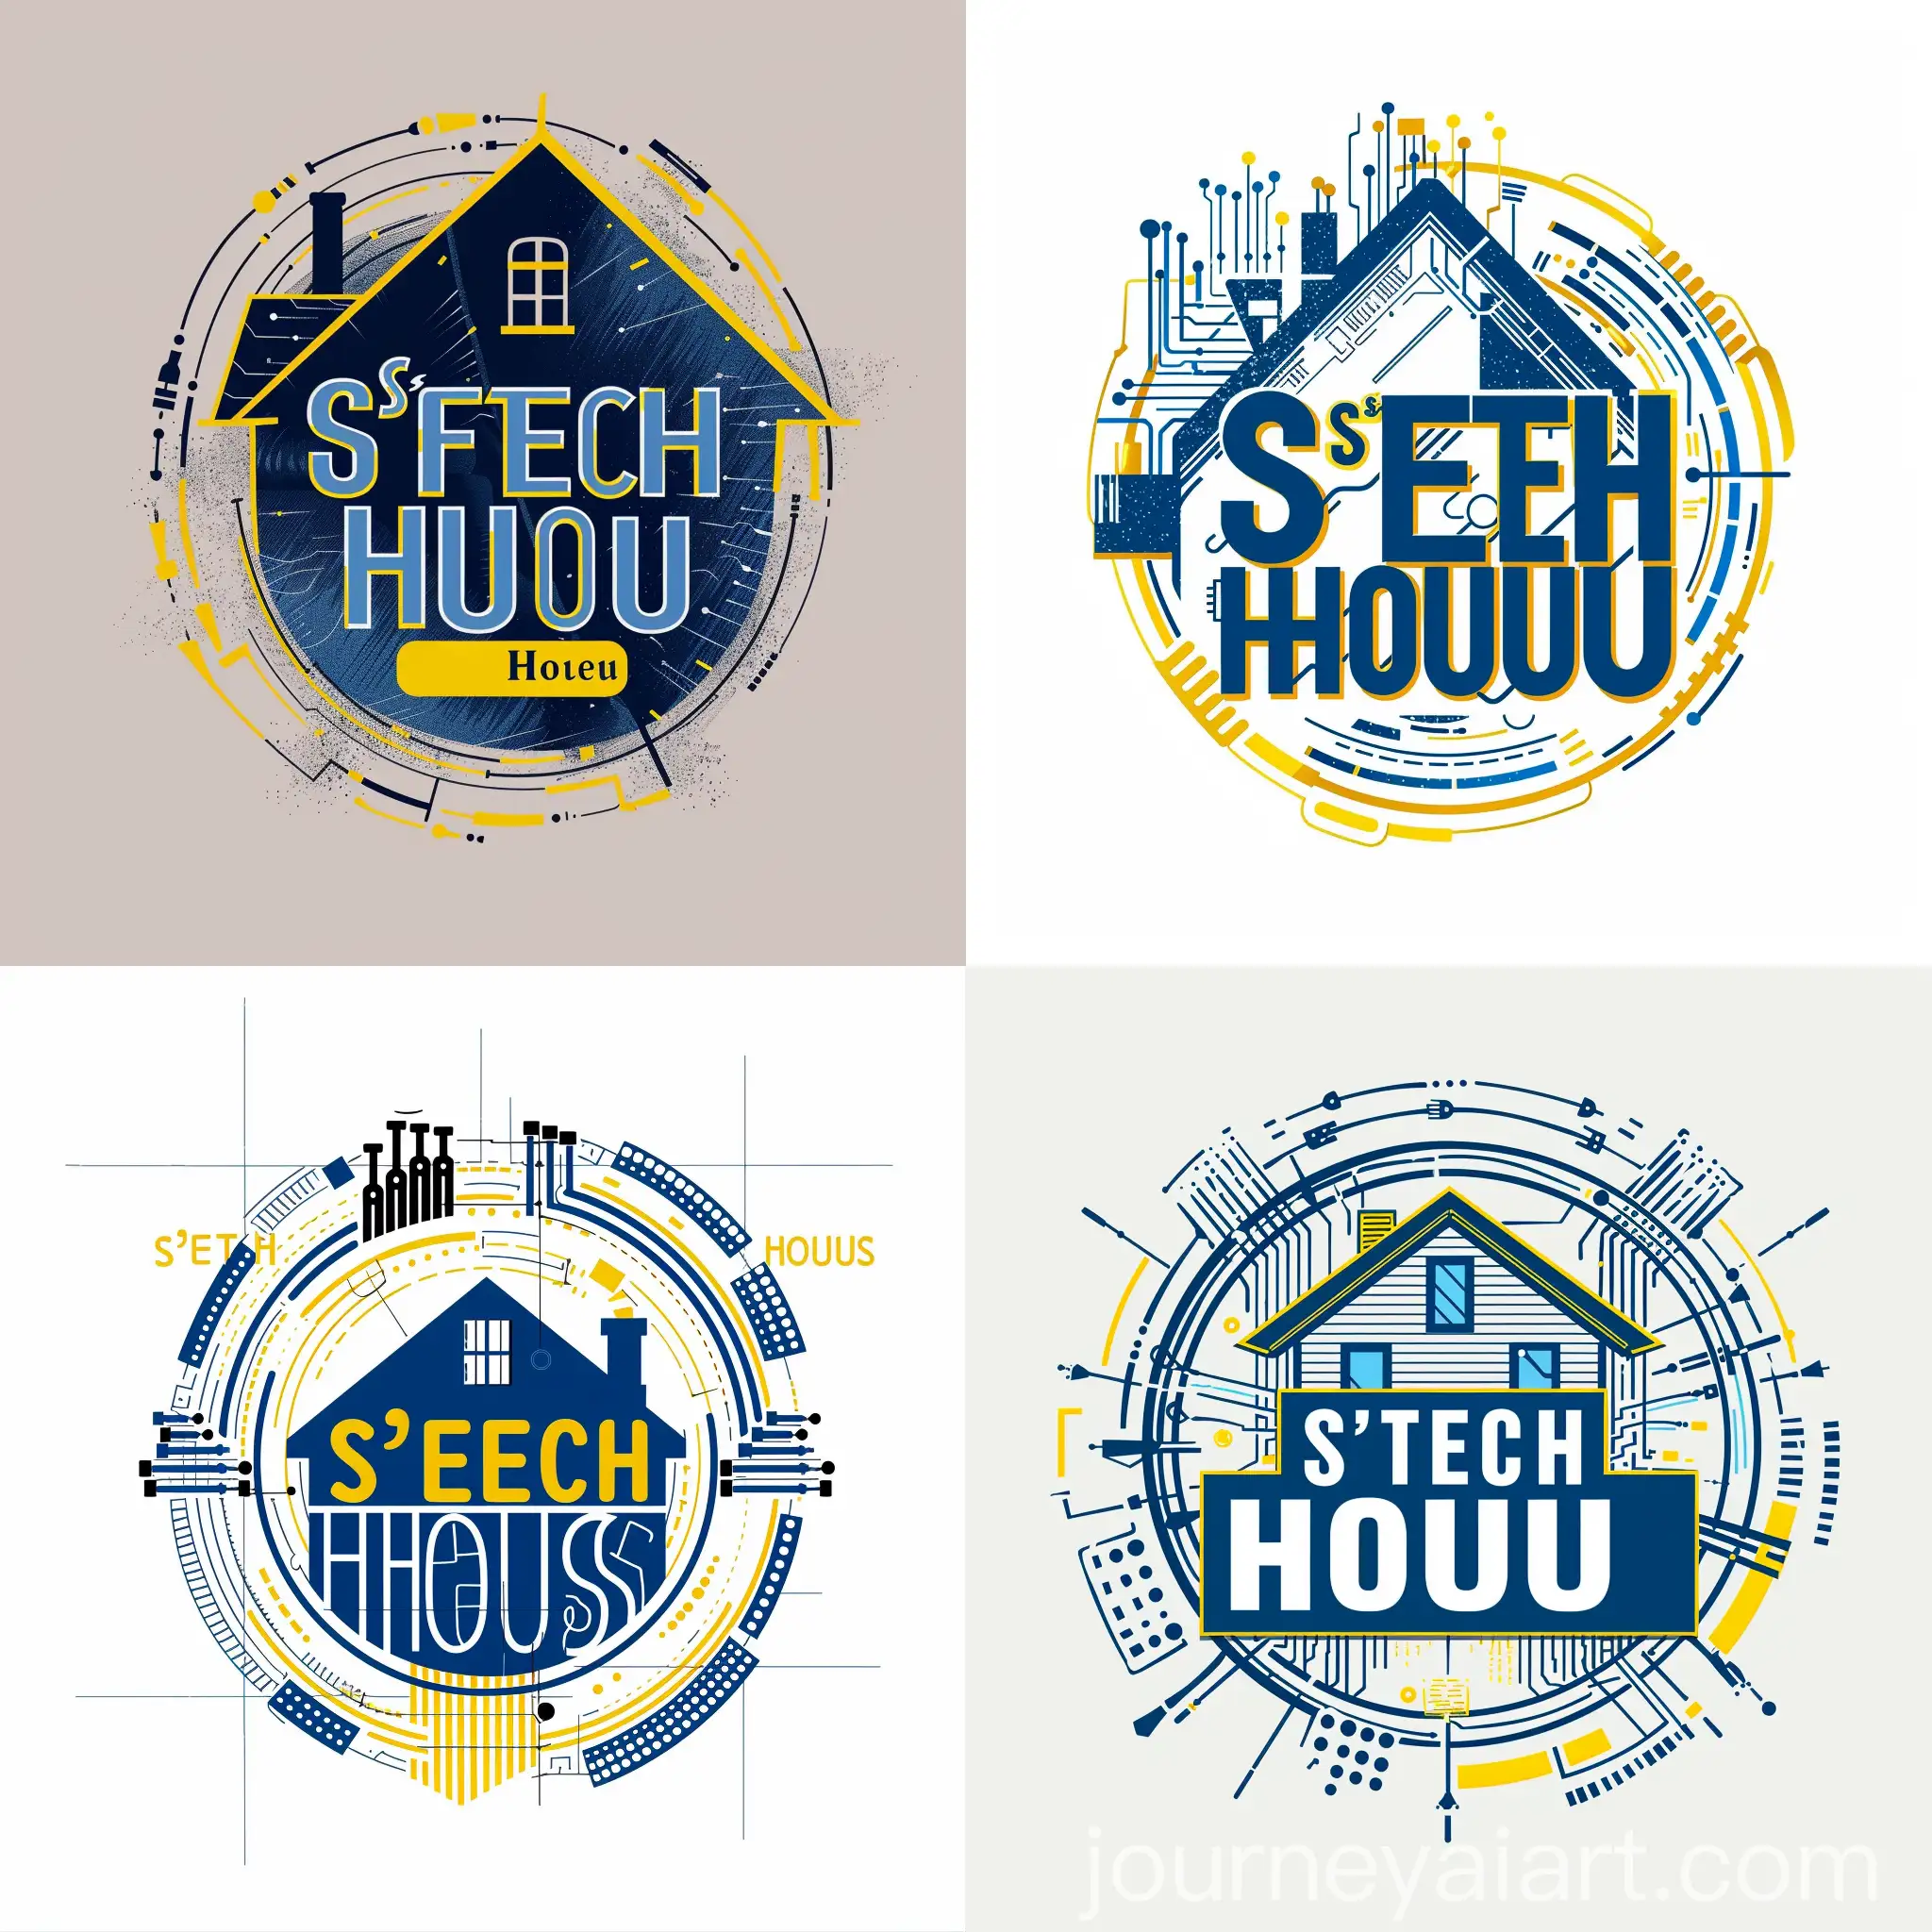 a logo design,with the text "S'Tech House", main symbol:Styled house and lines of circuit around. The Text 'S'Tech House' is in blue with a modern font, and yellow accents,Moderate,clear background